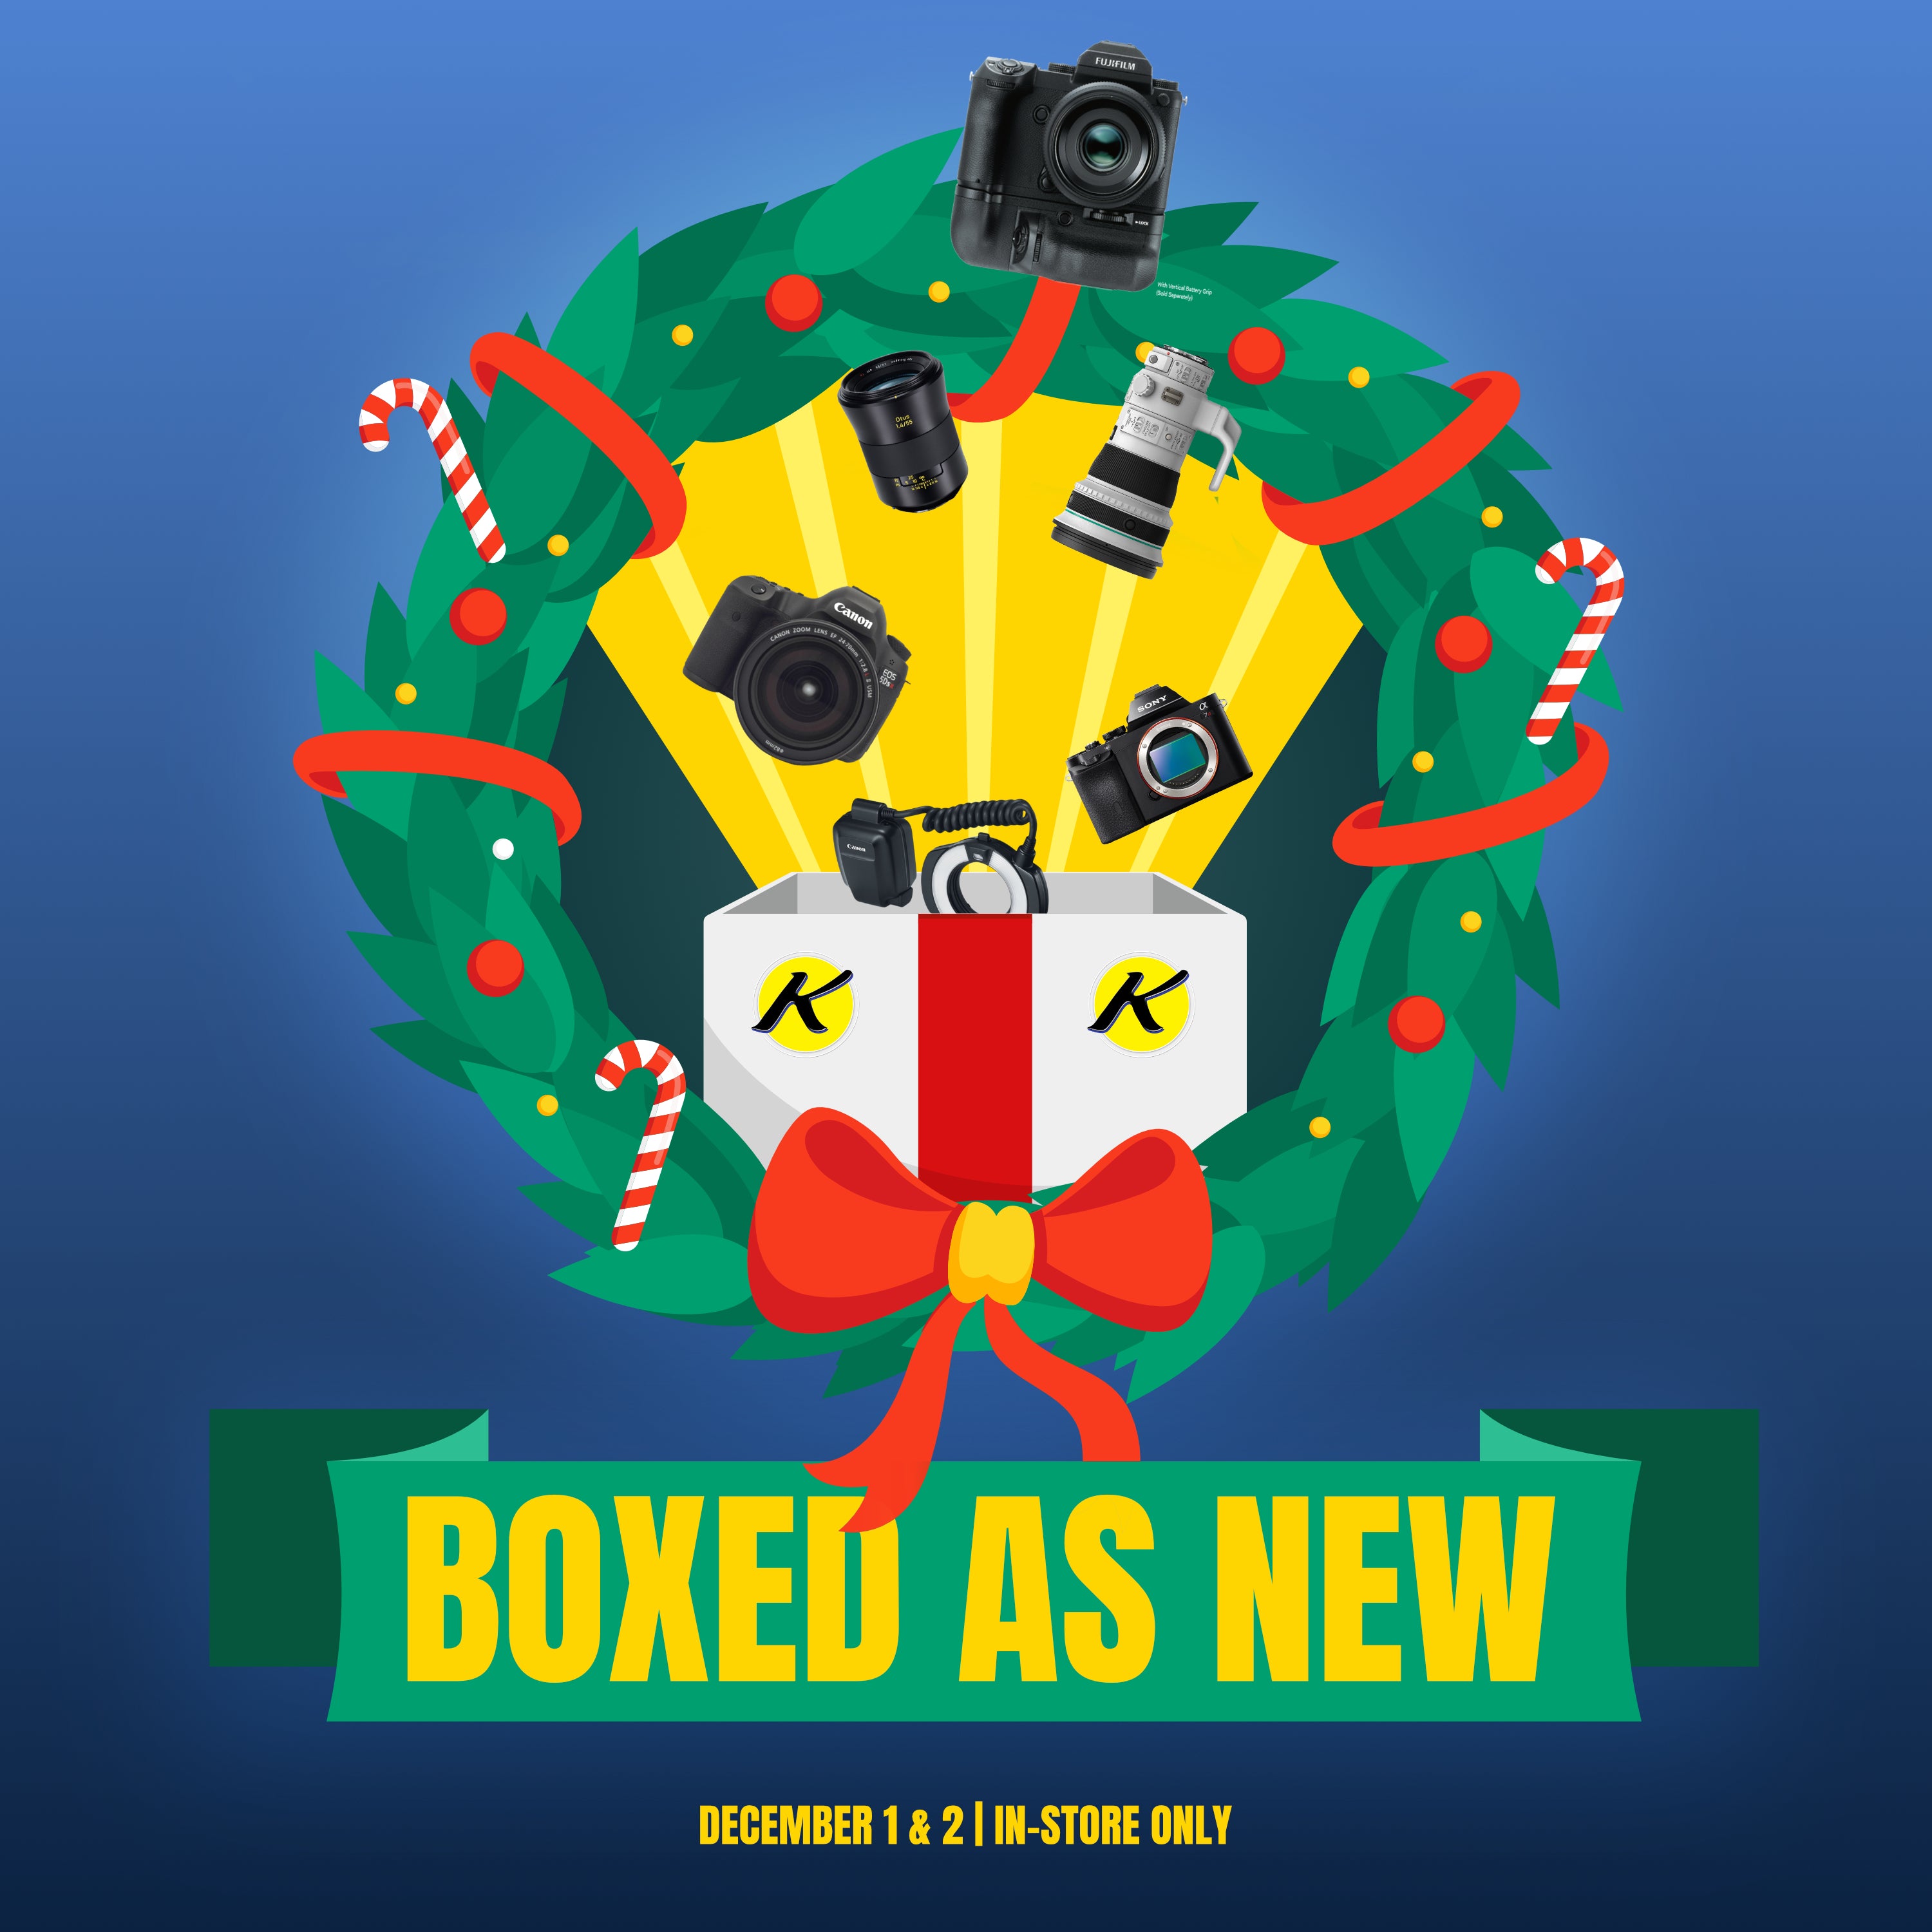 Boxed As New SALE - December 2018